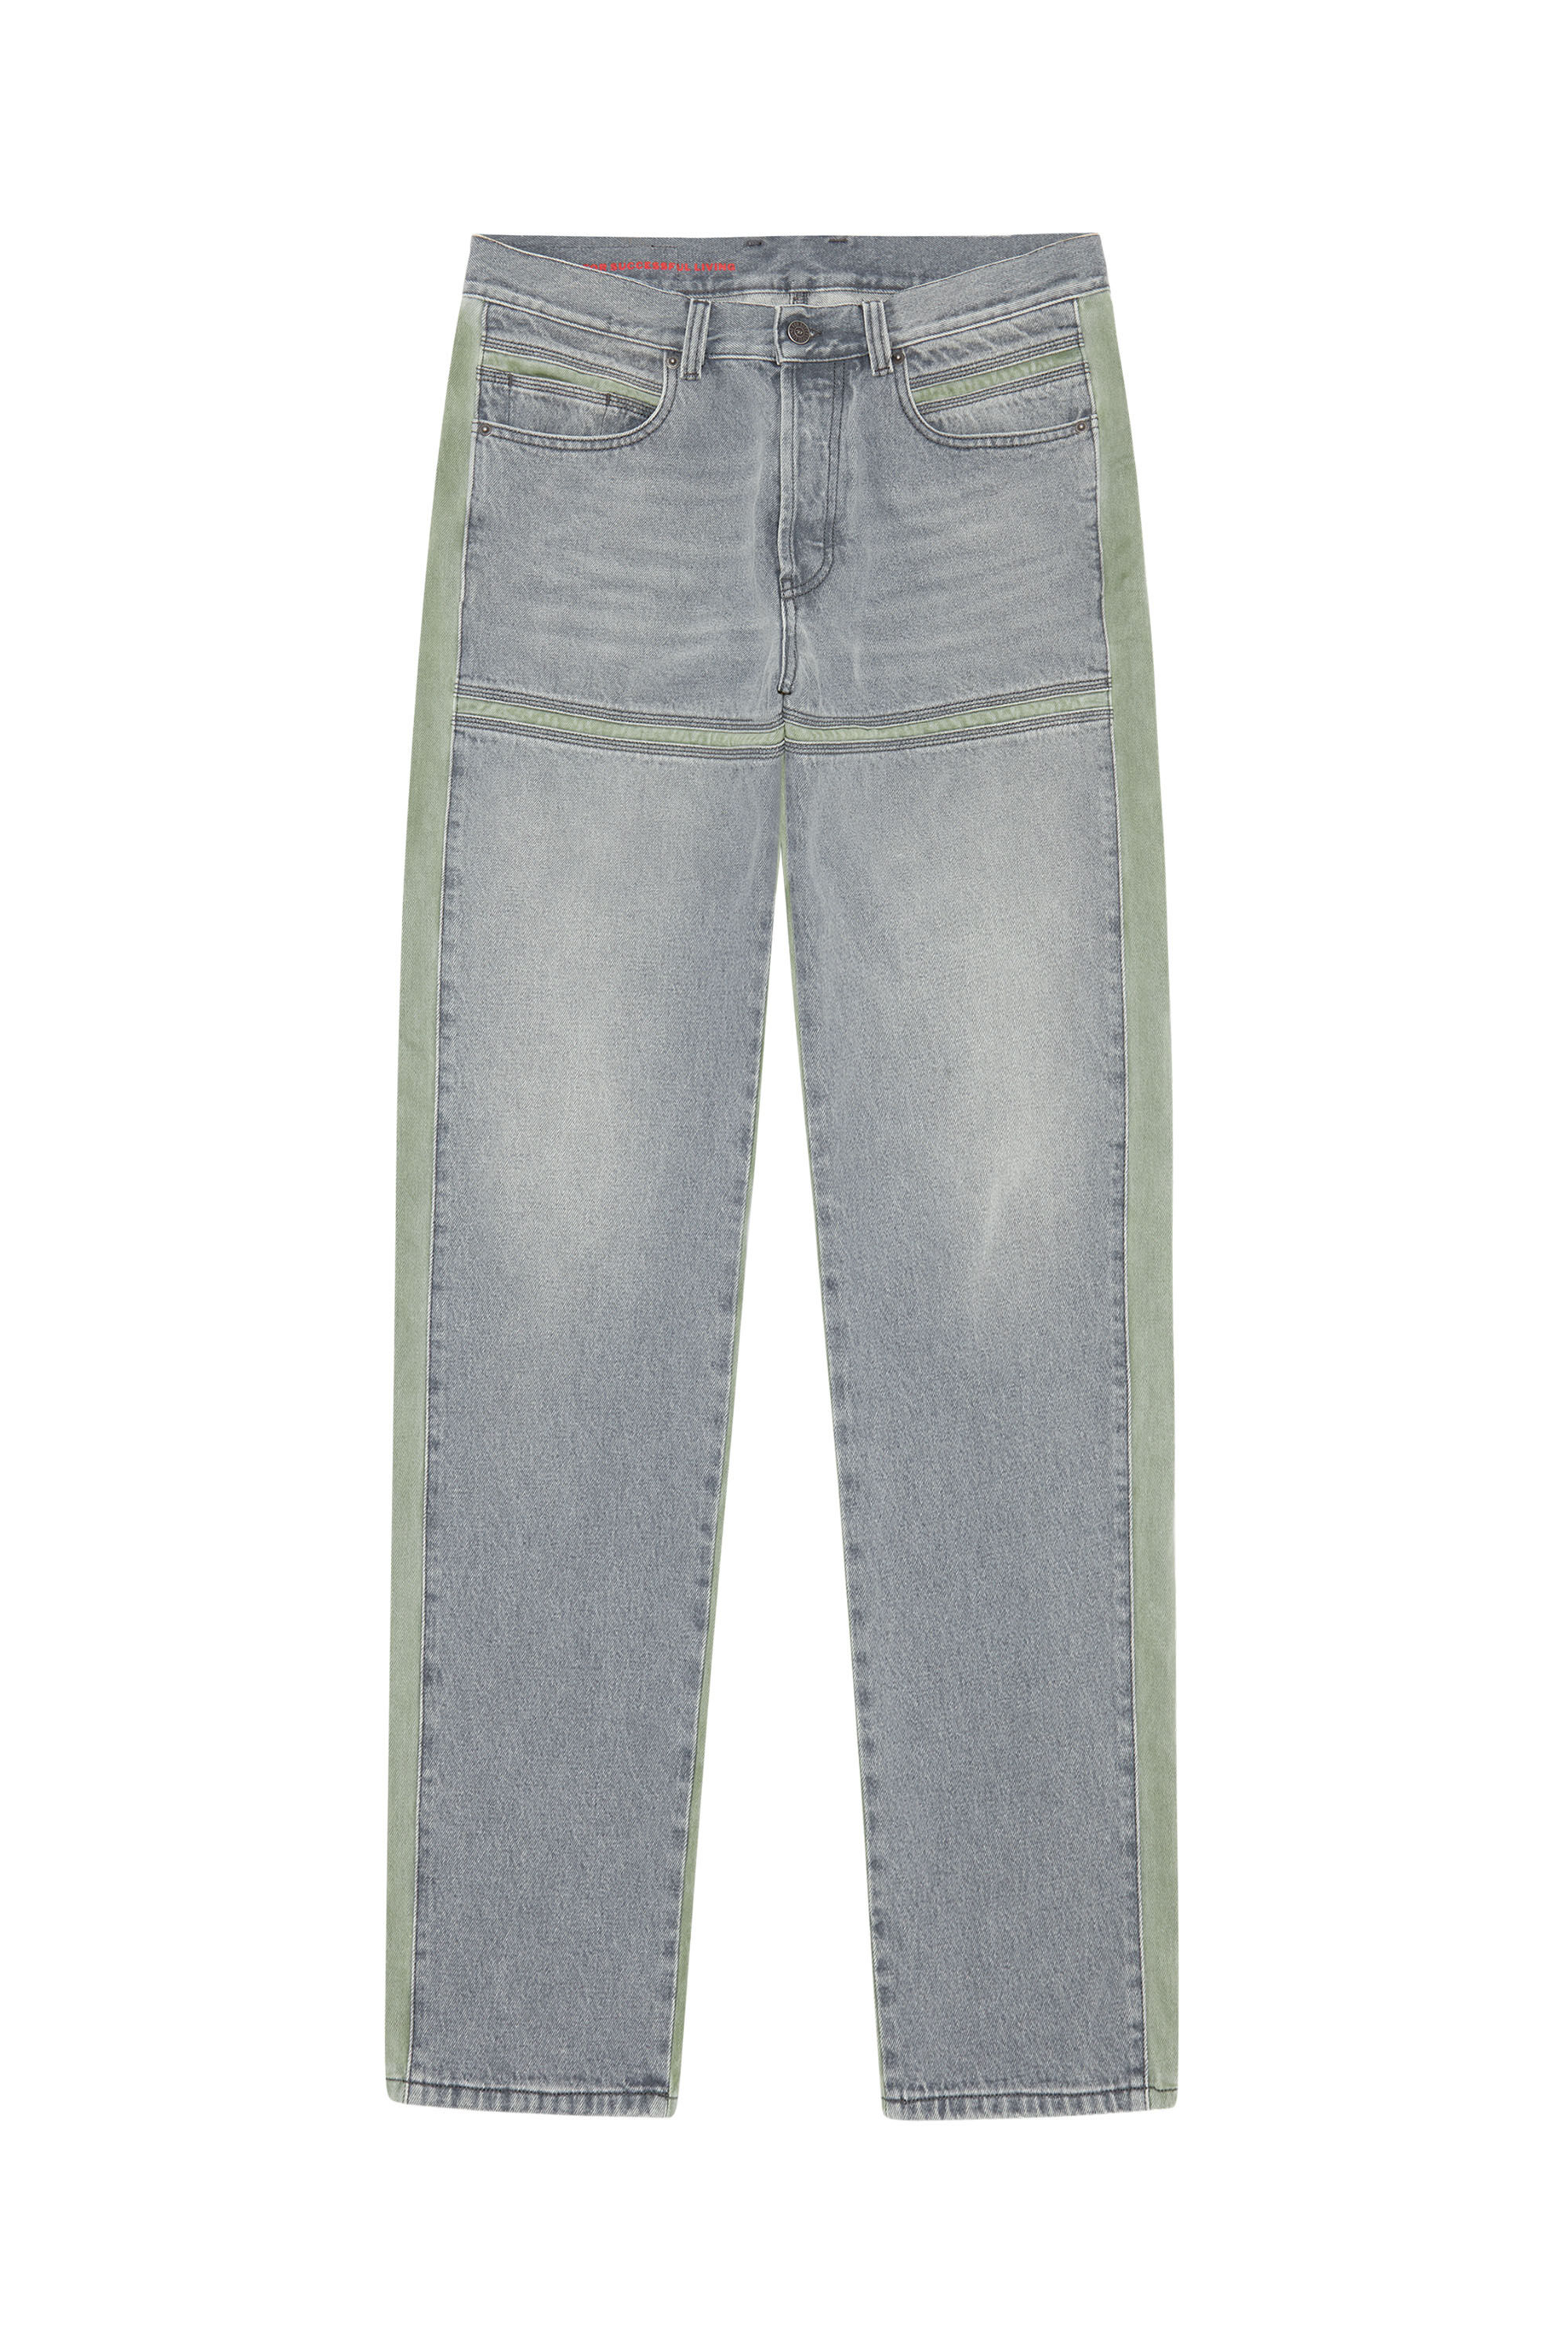 Diesel - D-Mand 007G2 Straight Jeans,  - Image 2